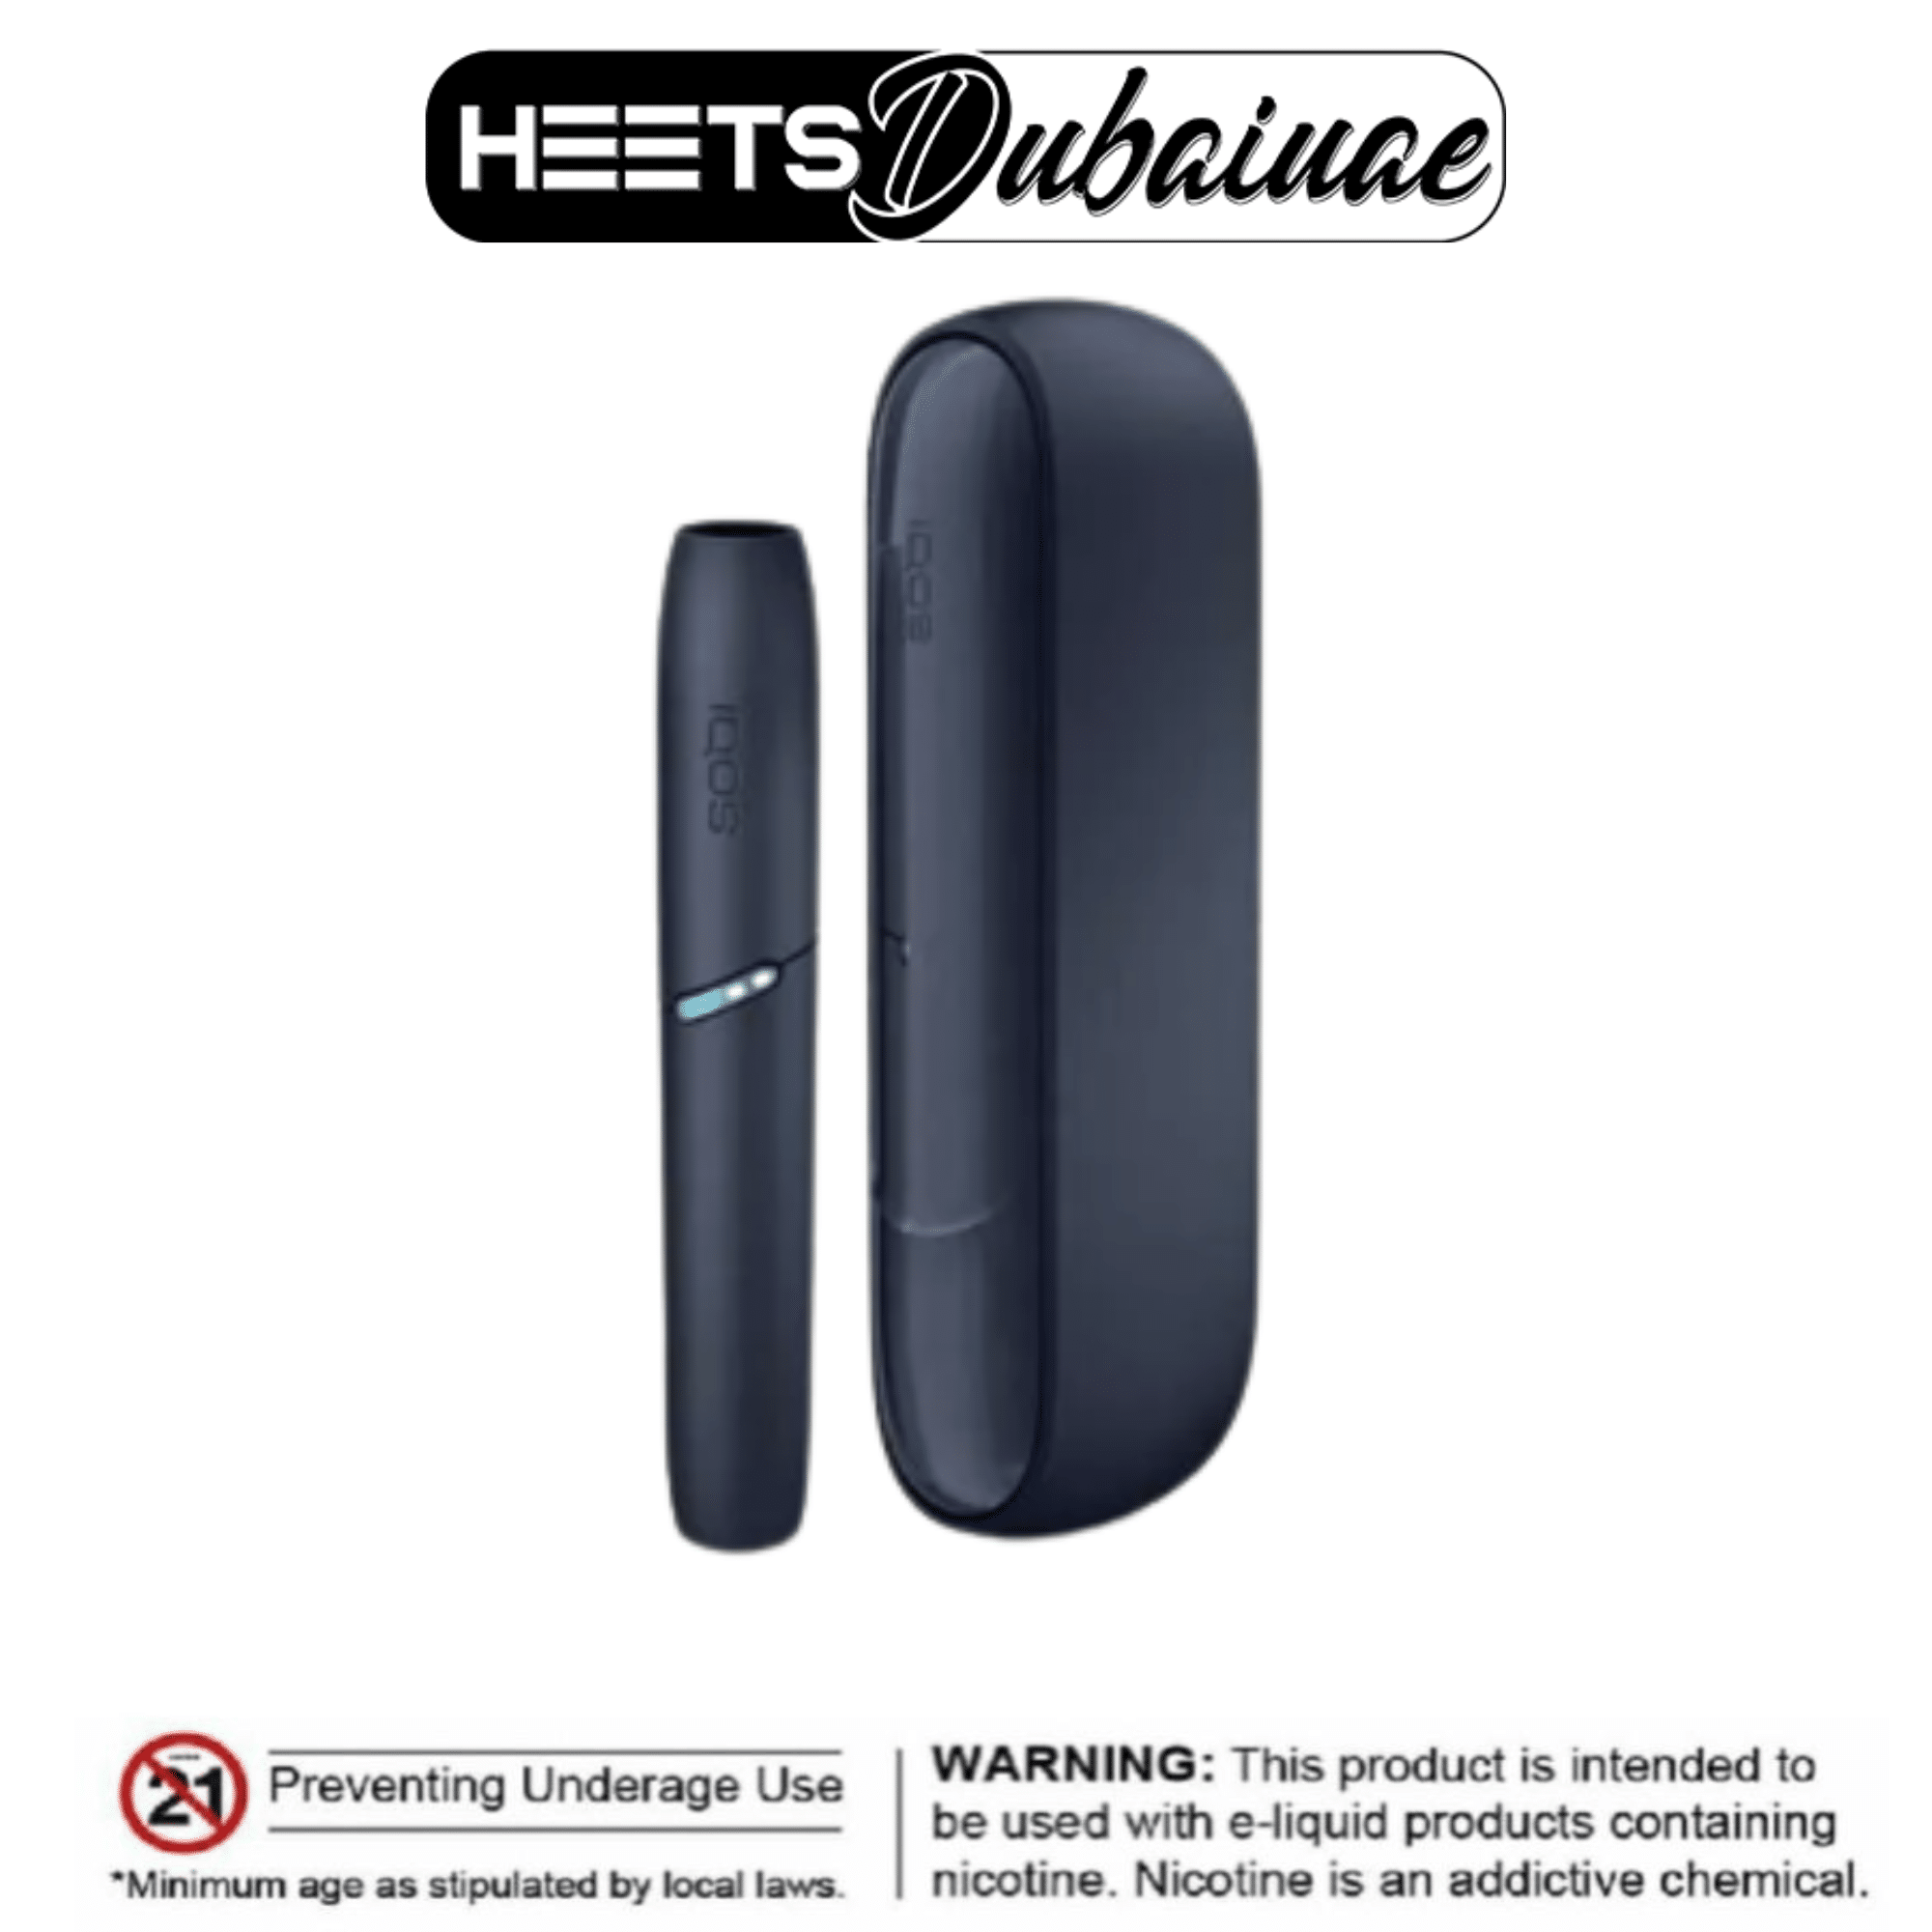 New revolutionary model of IQOS 3 DUO charges for two HEETS at